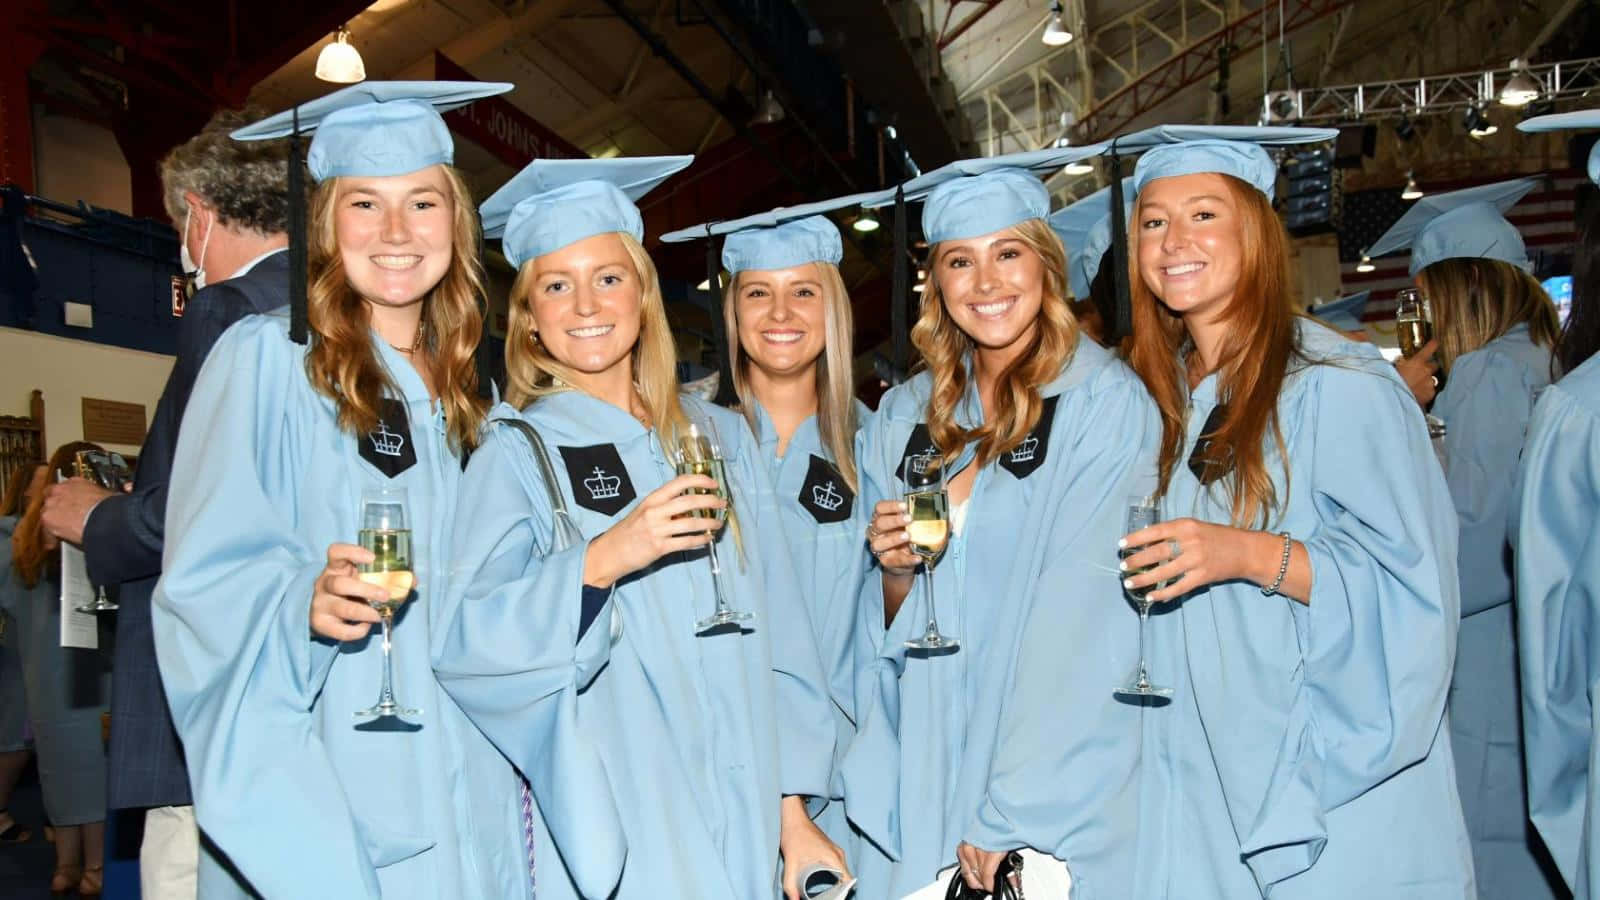 A Group Of Women In Blue Graduation Gowns Holding Champagne Glasses